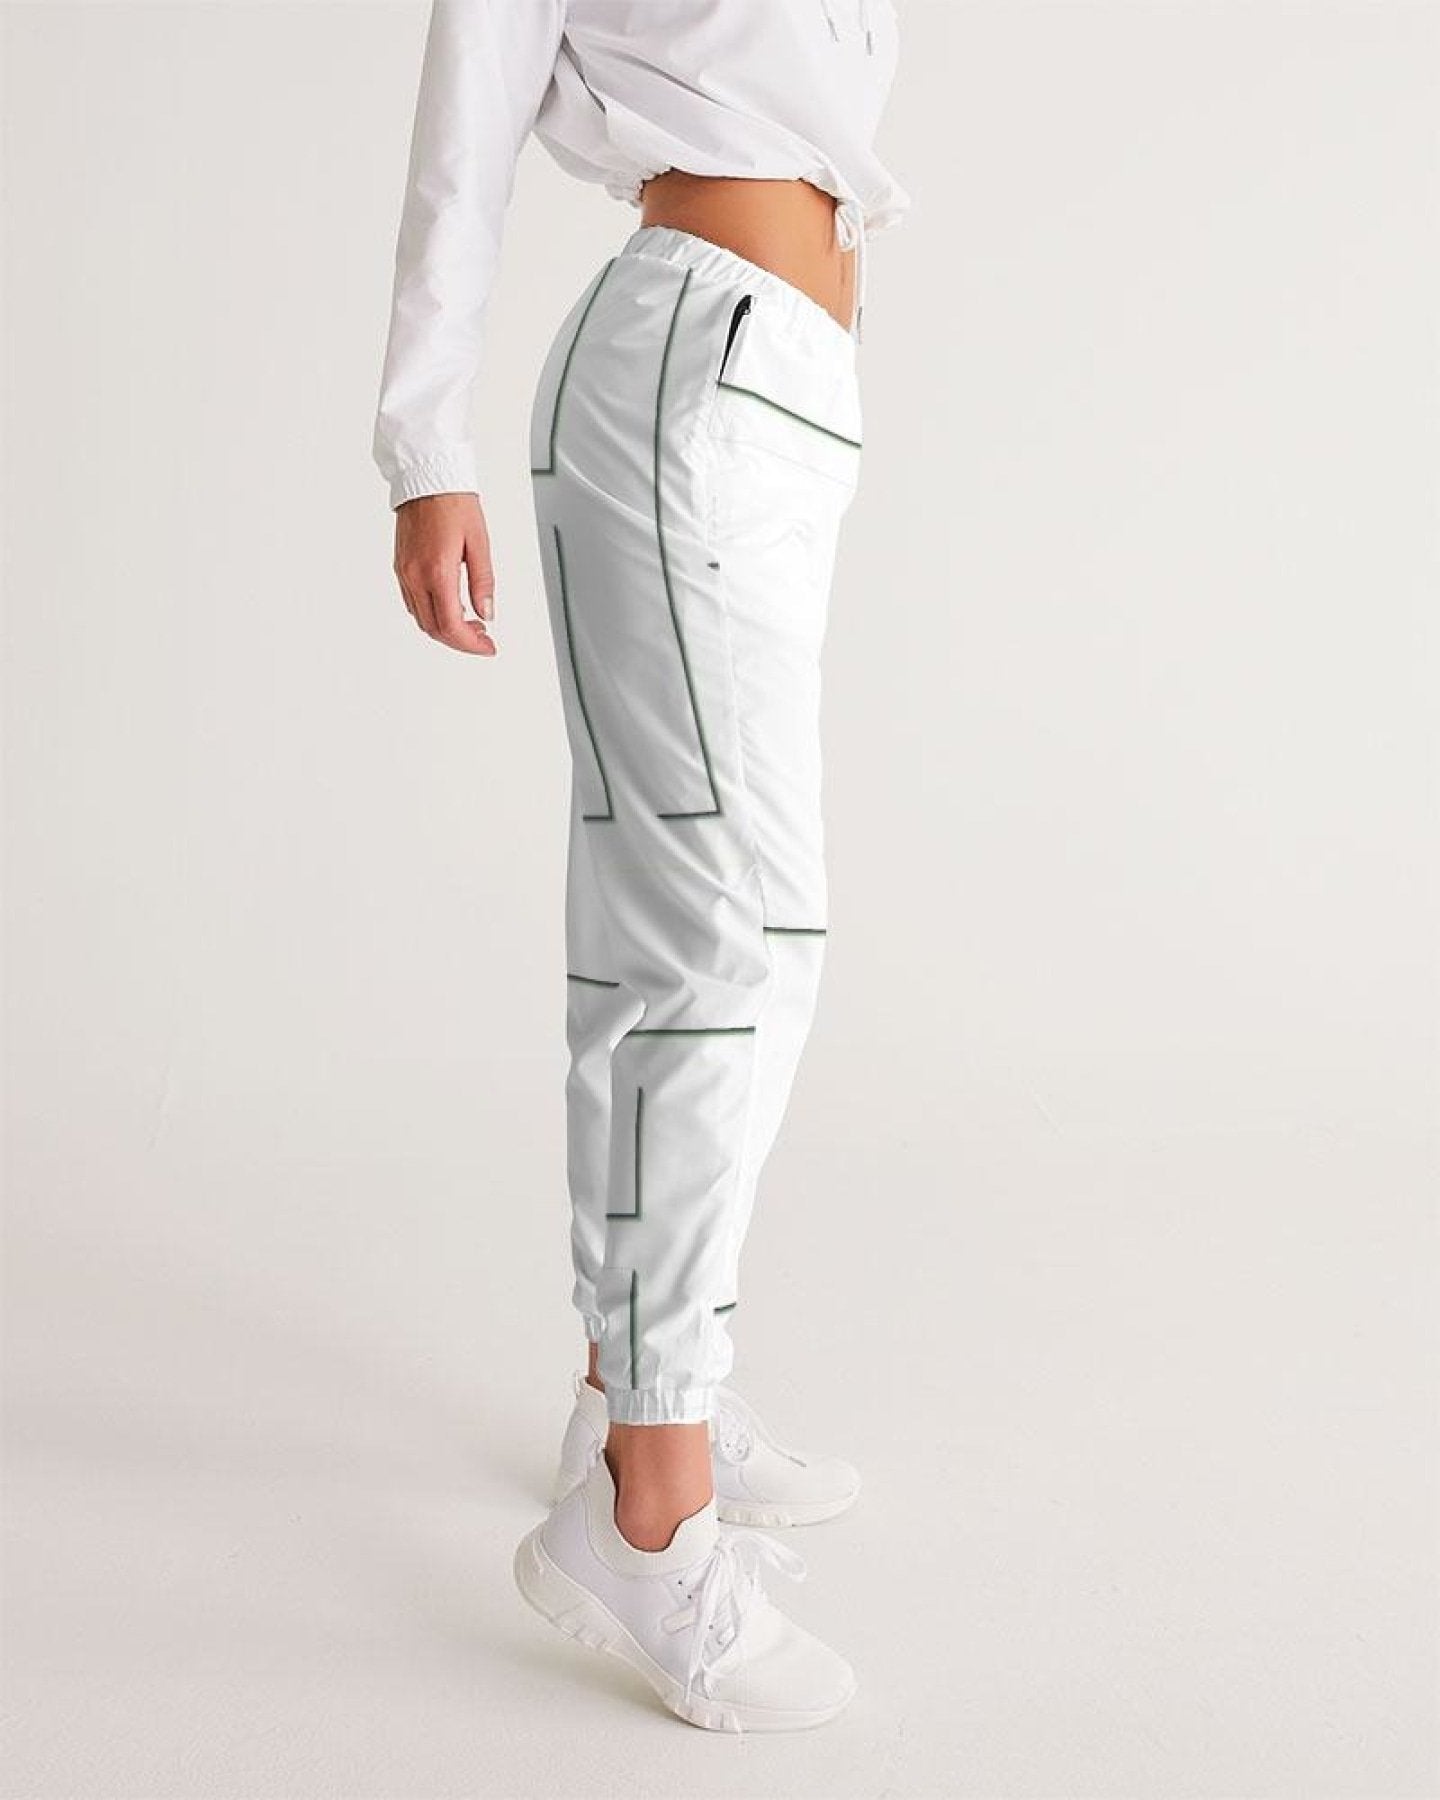 Explore our athletic track pants for a winning combination of sporty style and unmatched comfort.